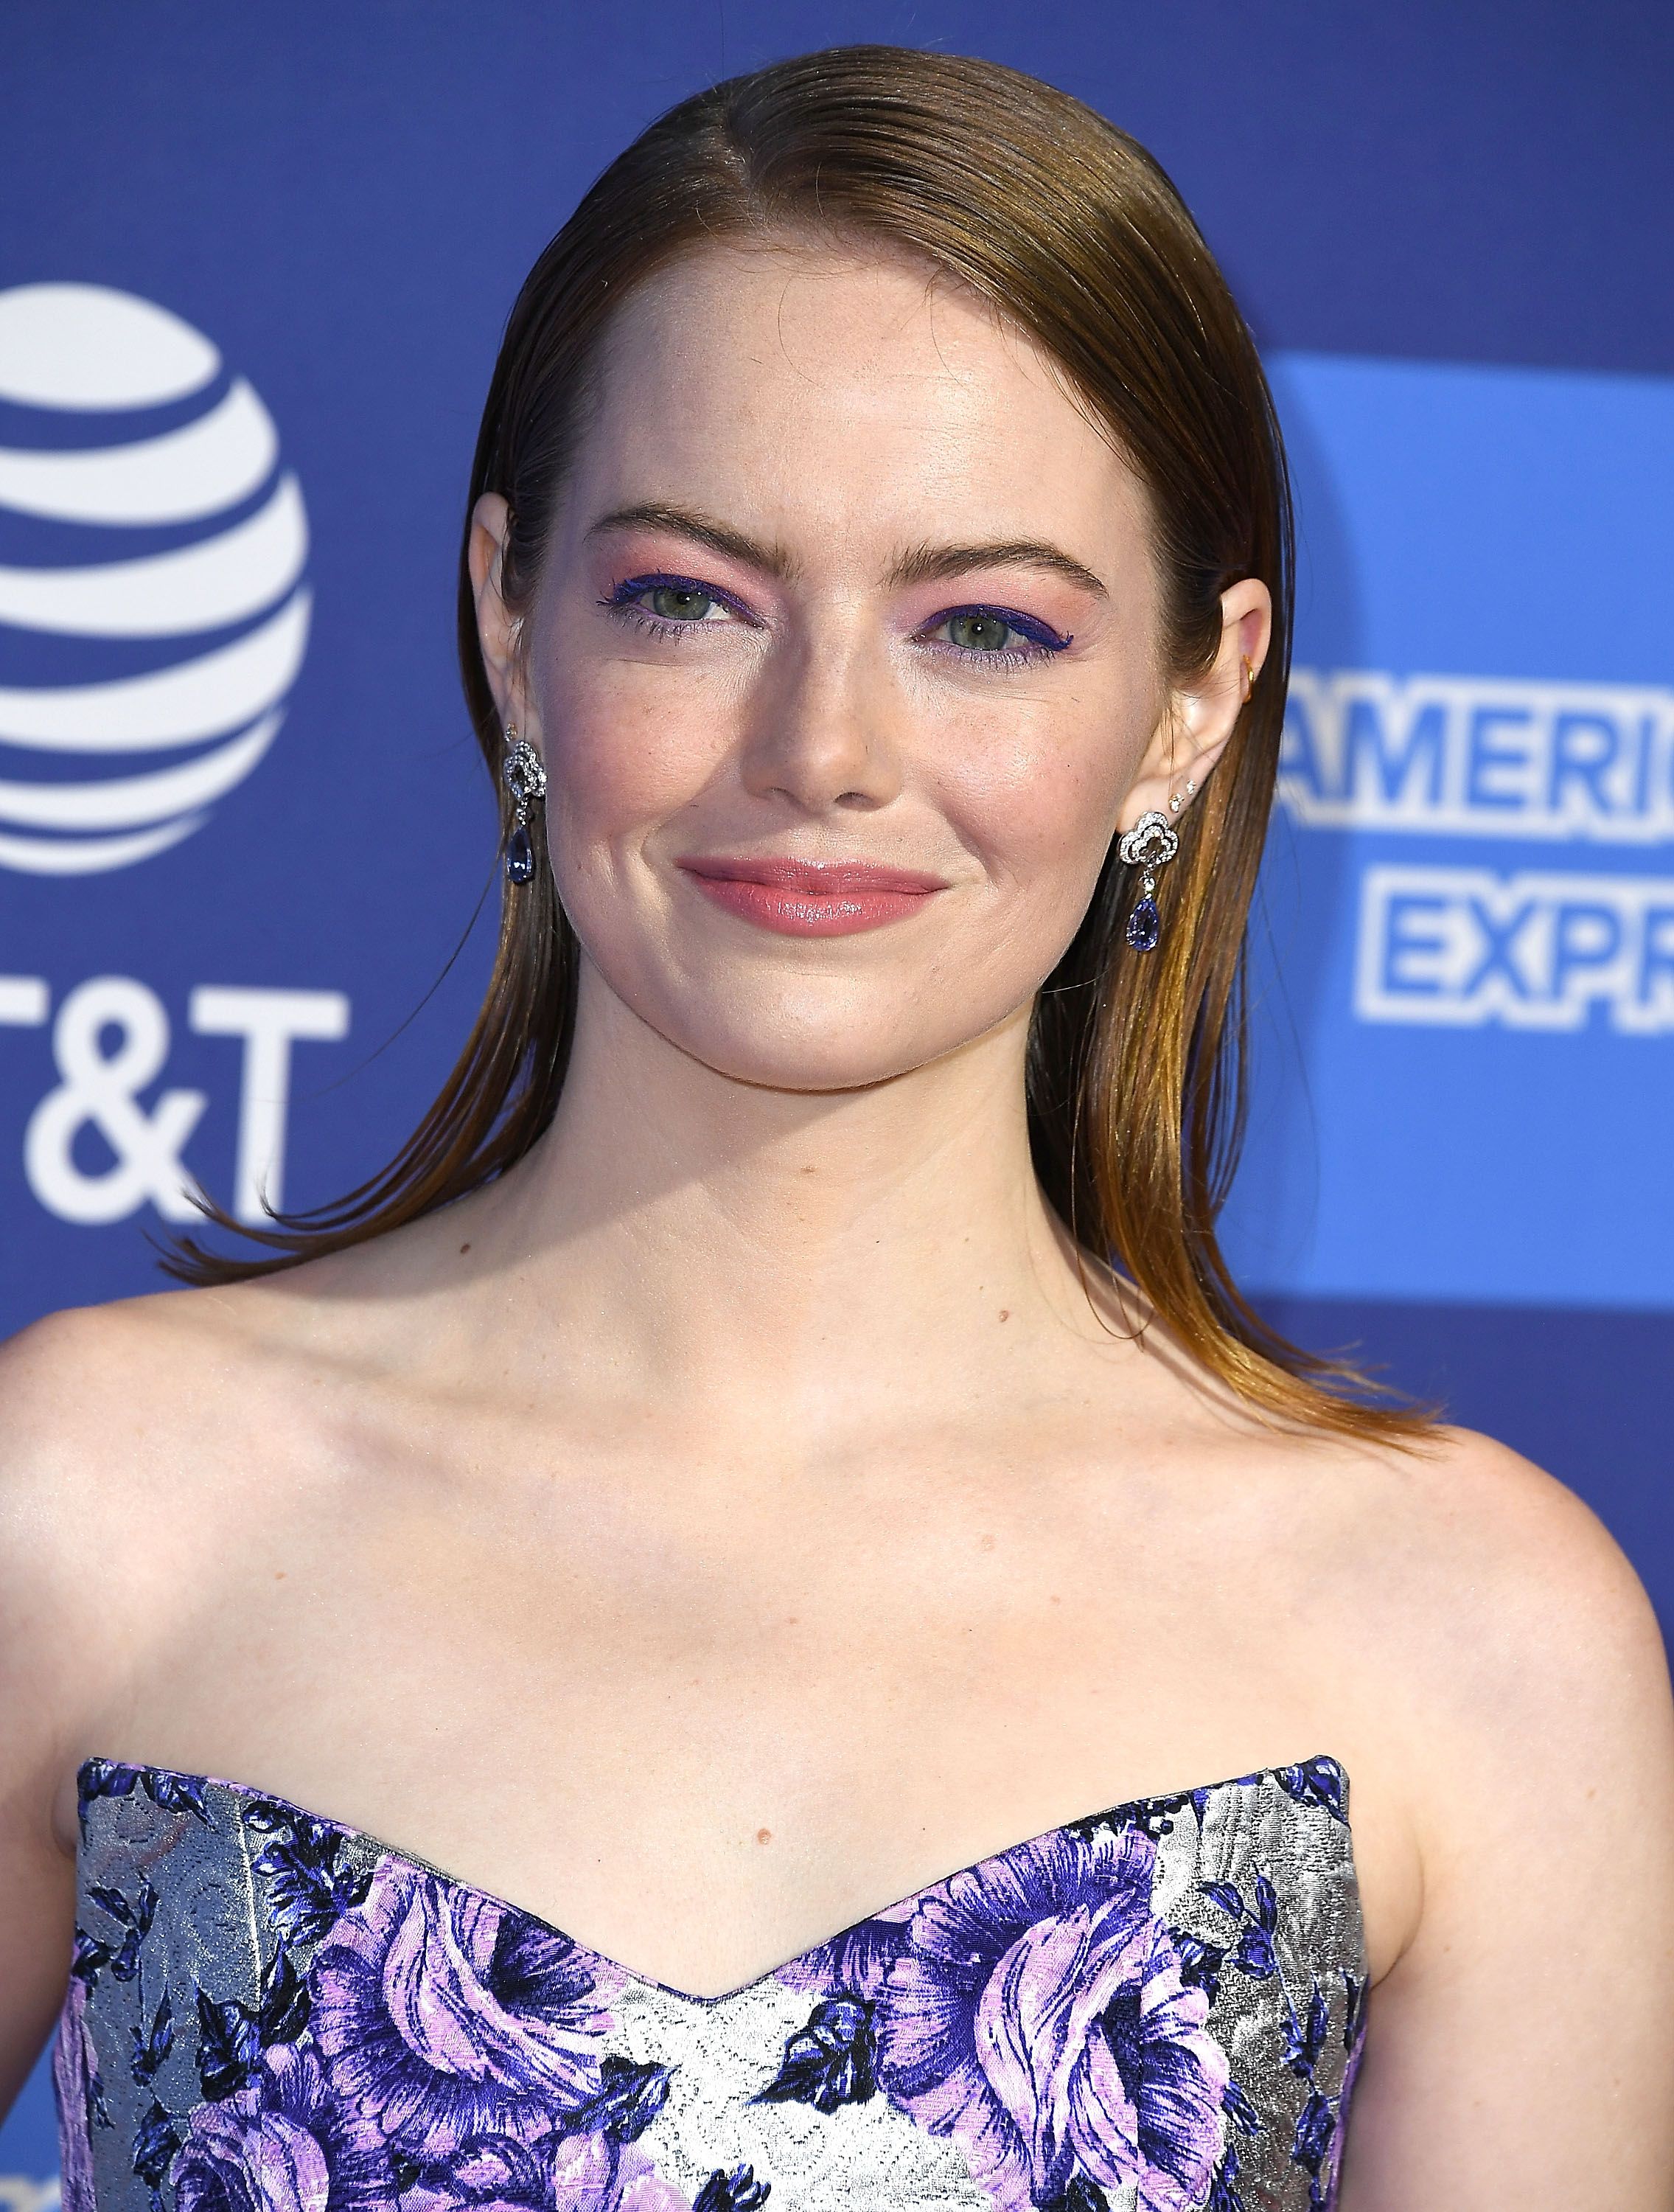 Emma Stone Louis Vuitton Cruise Collection May 28, 2018 – Star Style